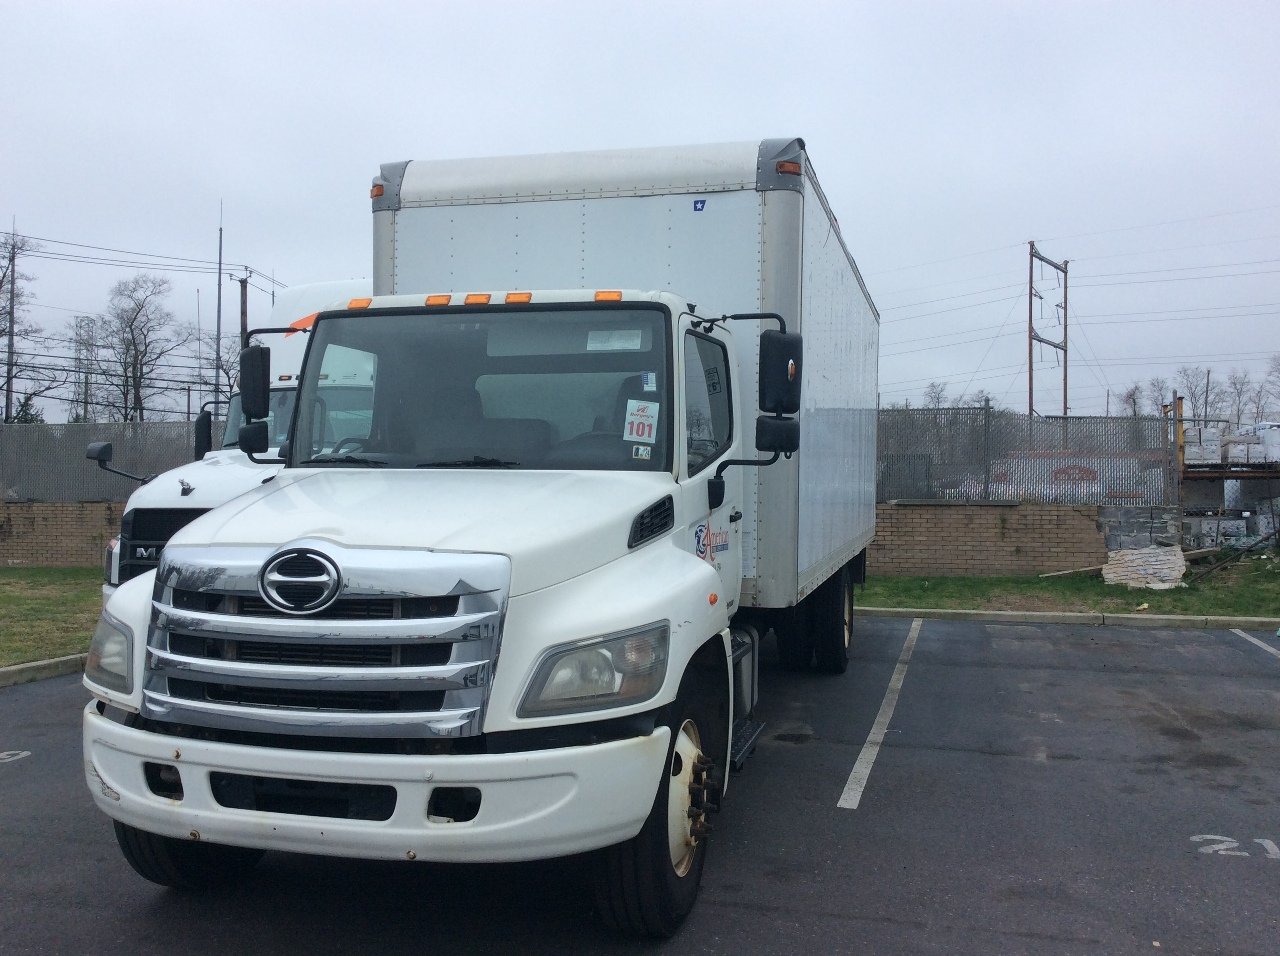 Used Truck Inventory - 1001821 01 2 - 50